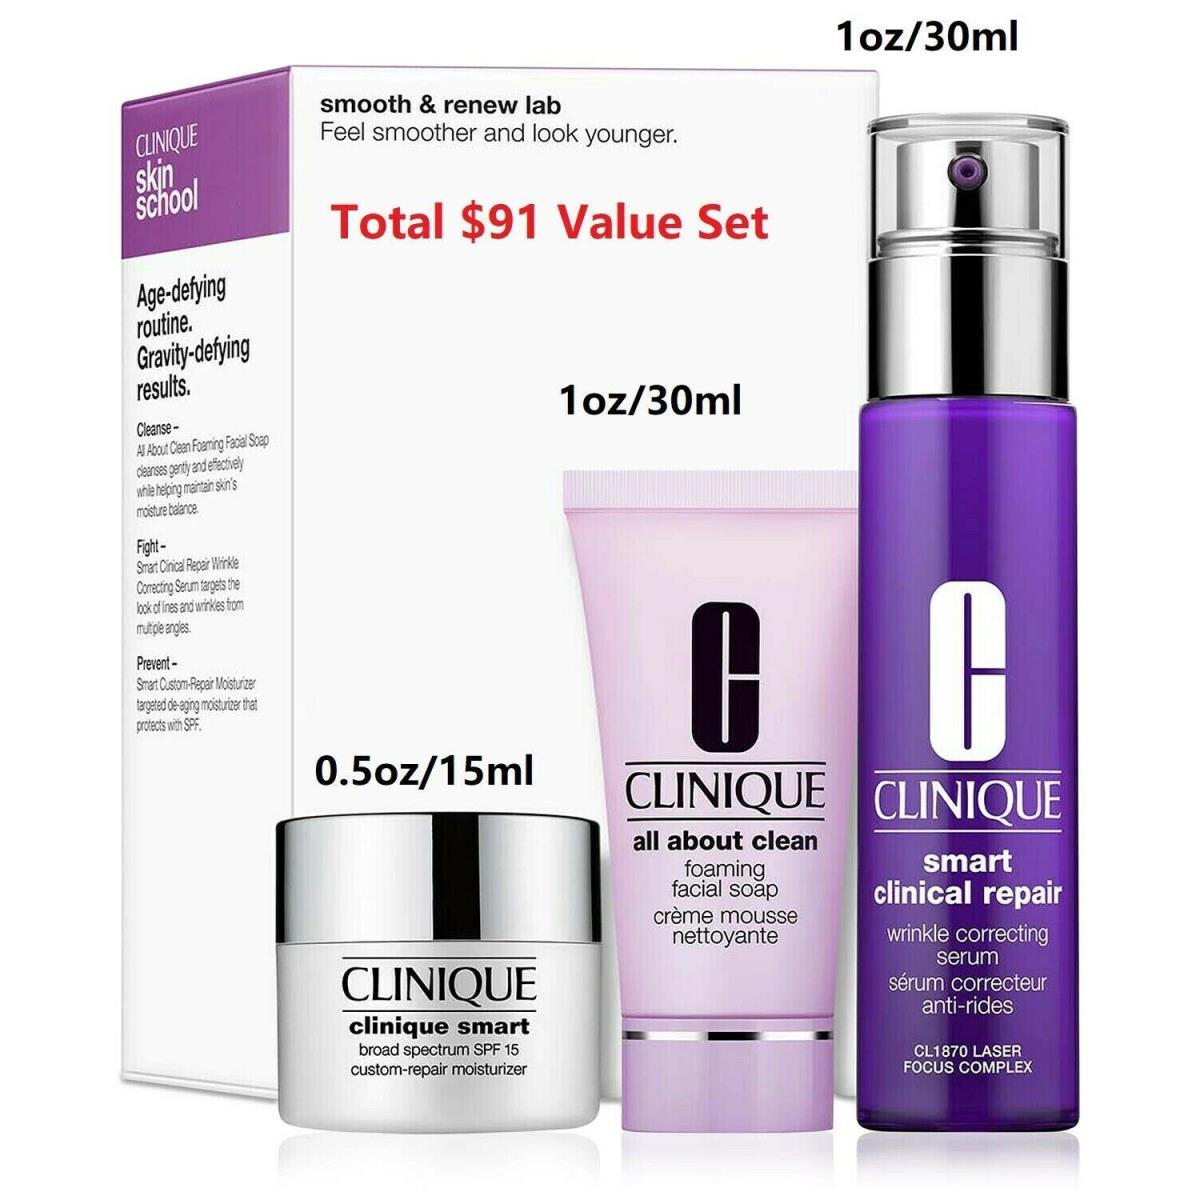 Clinique Smart Clinical Repair Wrinkle Correcting Serum 1oz Set Smooth Renew